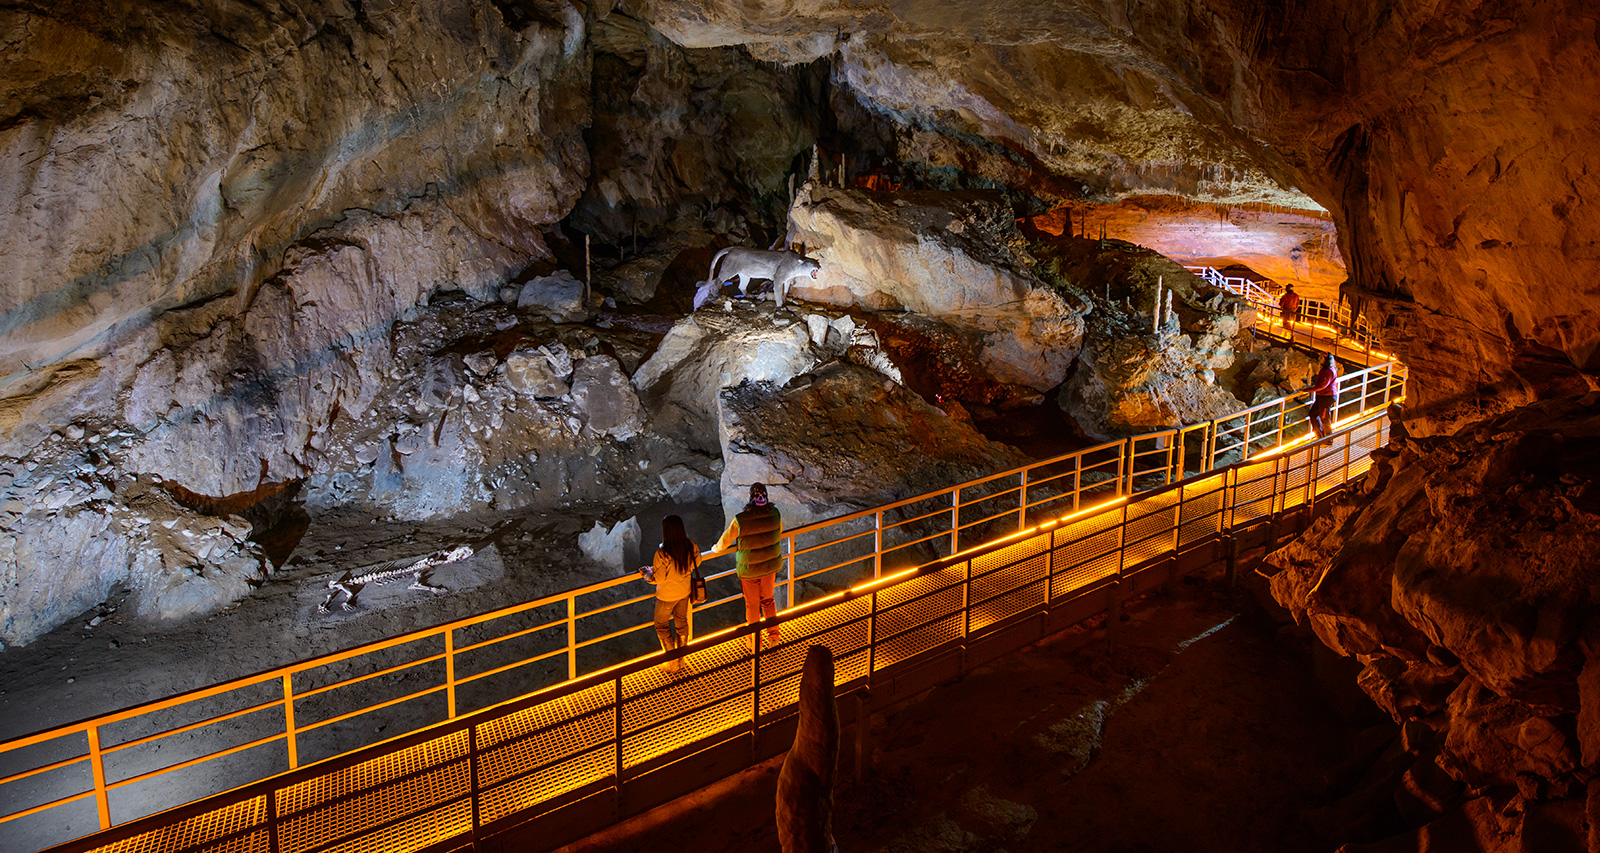 The caves to visit in the Basque Country